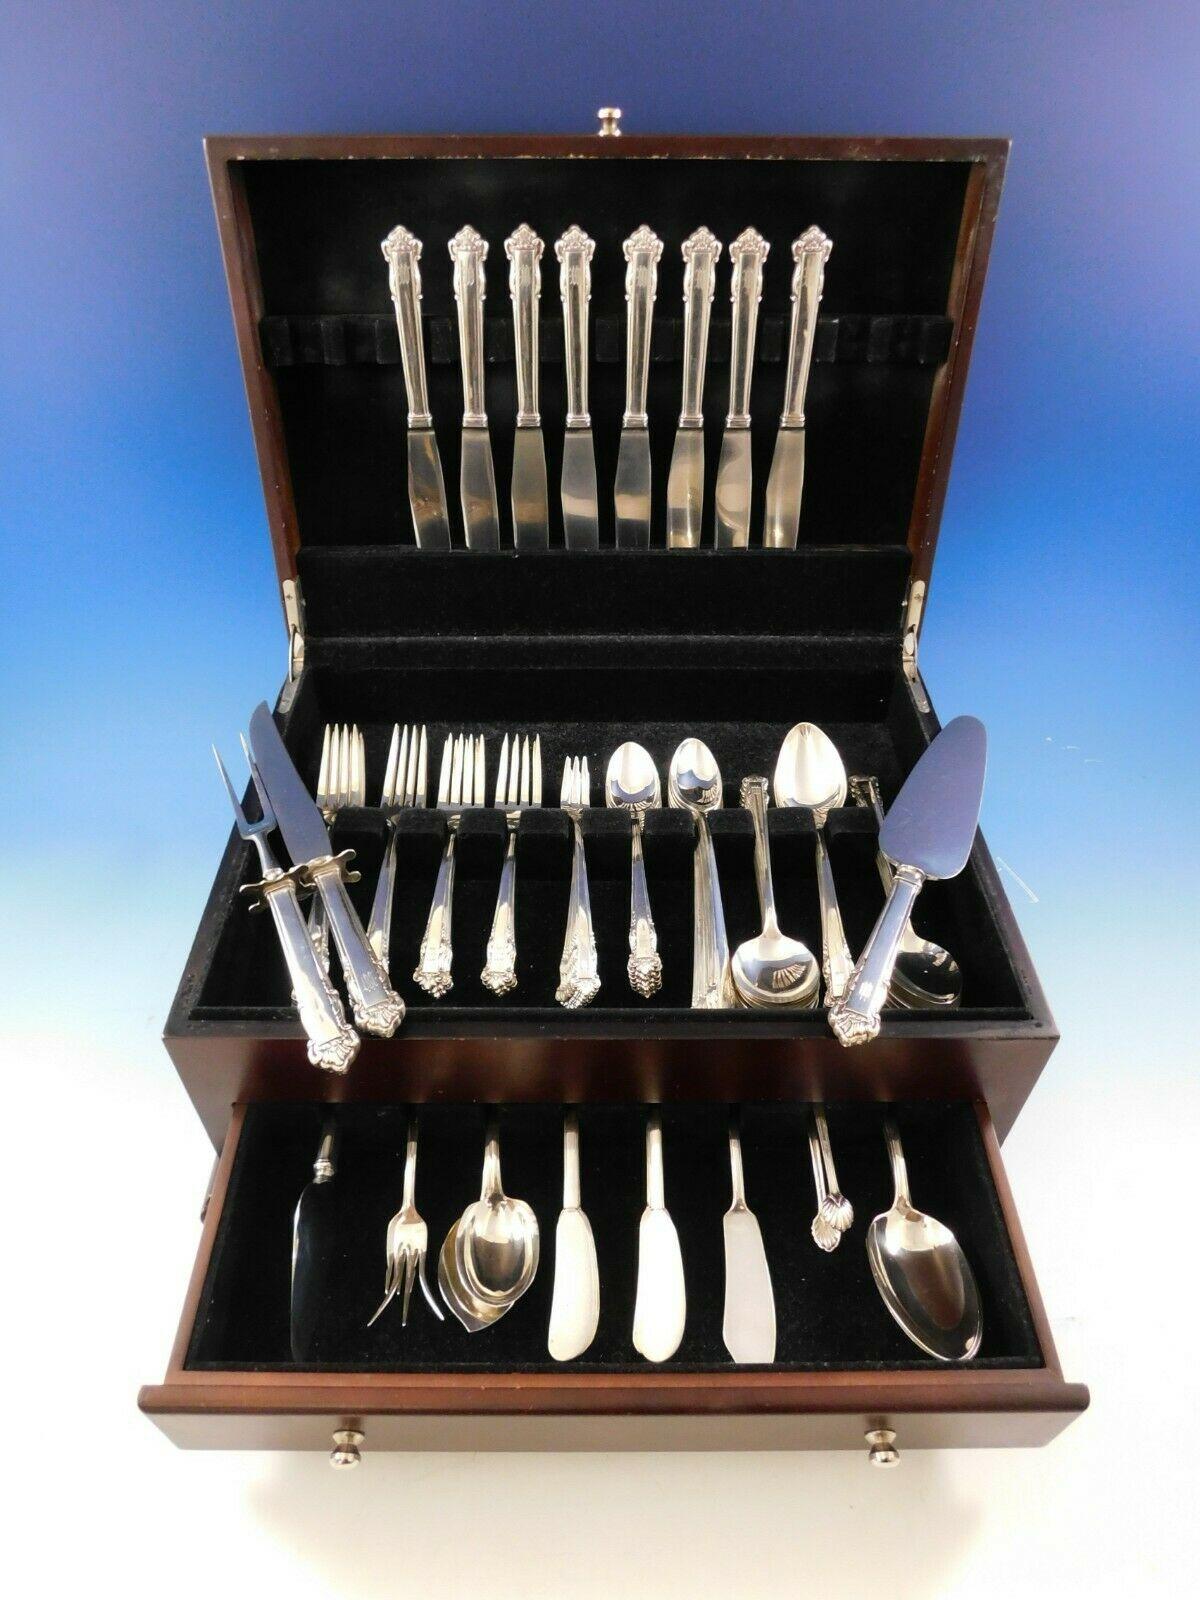 English Shell by Lunt sterling silver flatware set, 84 pieces. This set includes:

8 knives, 8 3/4